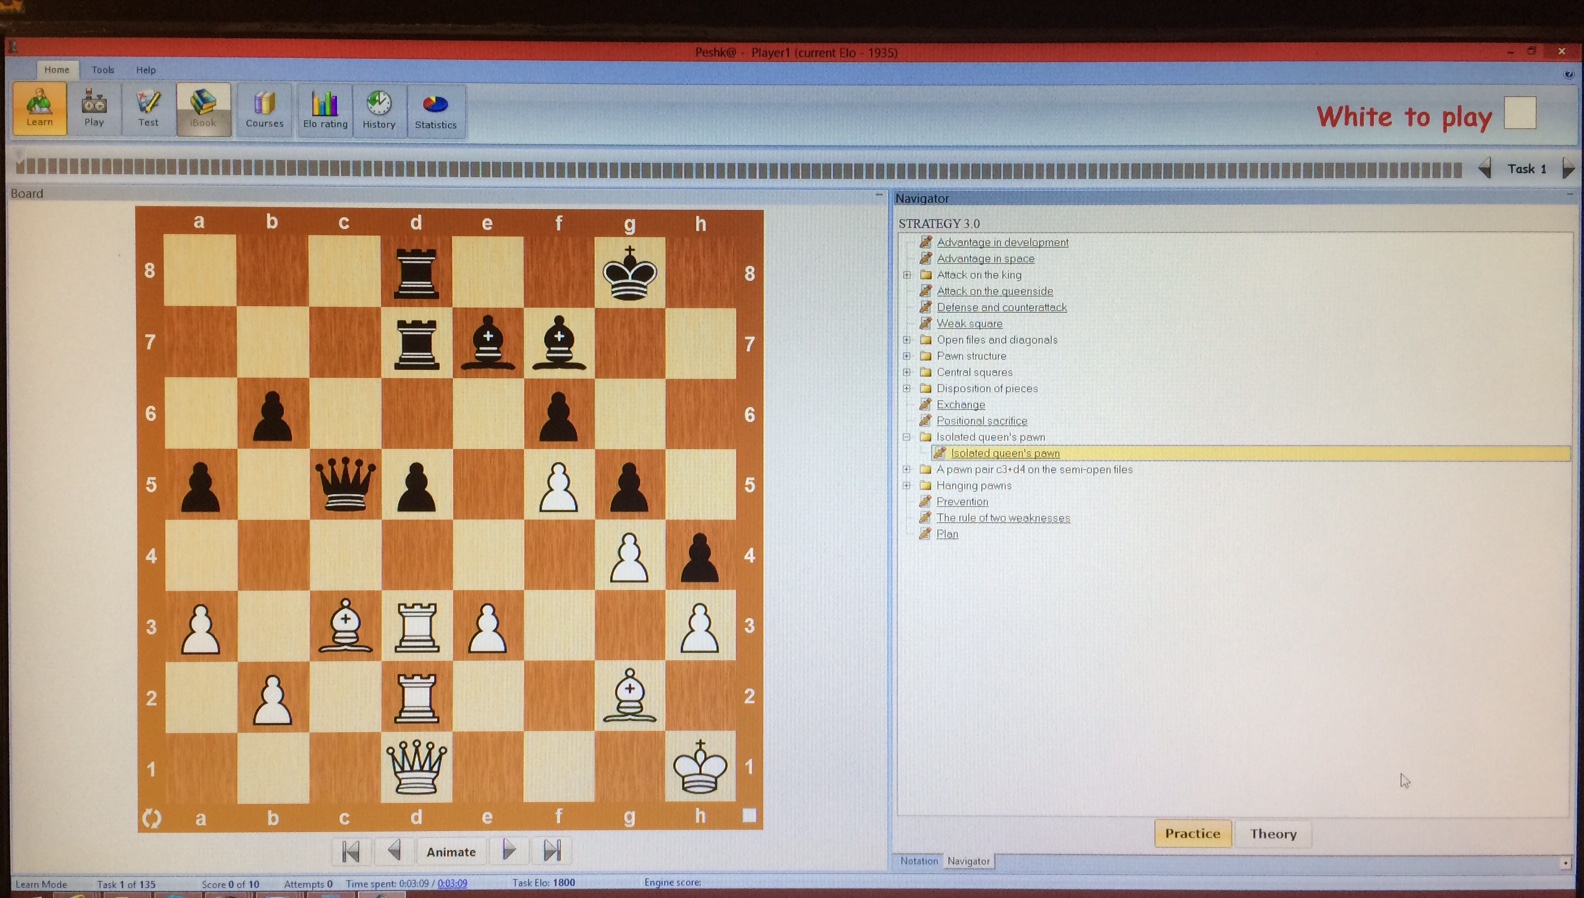 software - Is there any (free) online tool for calculating Glicko-2 ratings  after a game? - Chess Stack Exchange